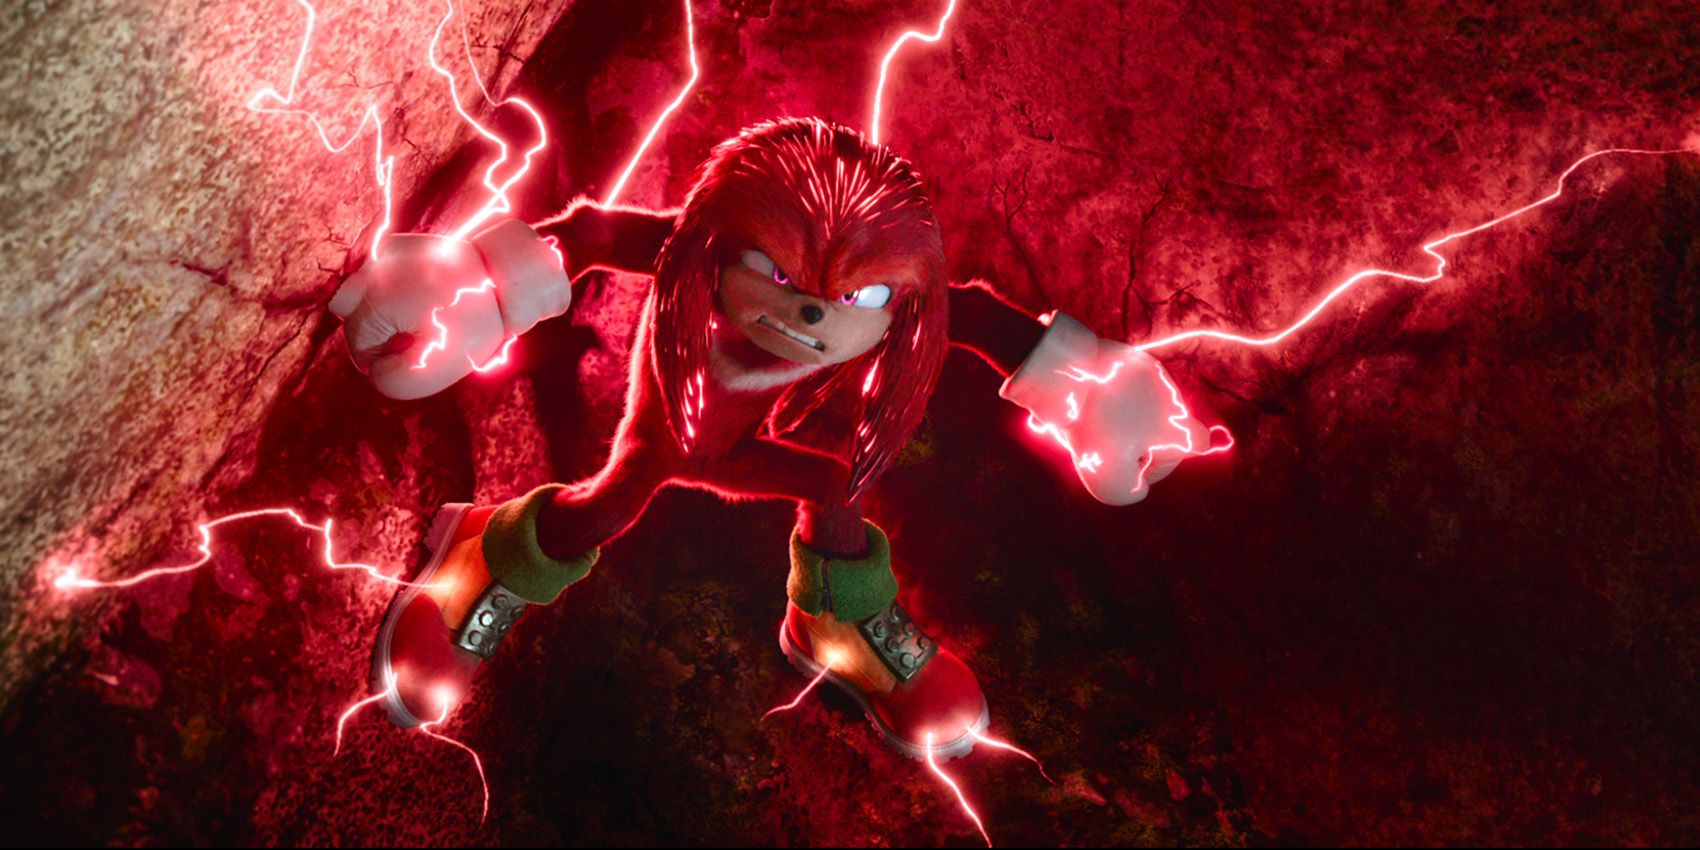 Knuckles with red electricity in Sonic The Hedgehog 2 